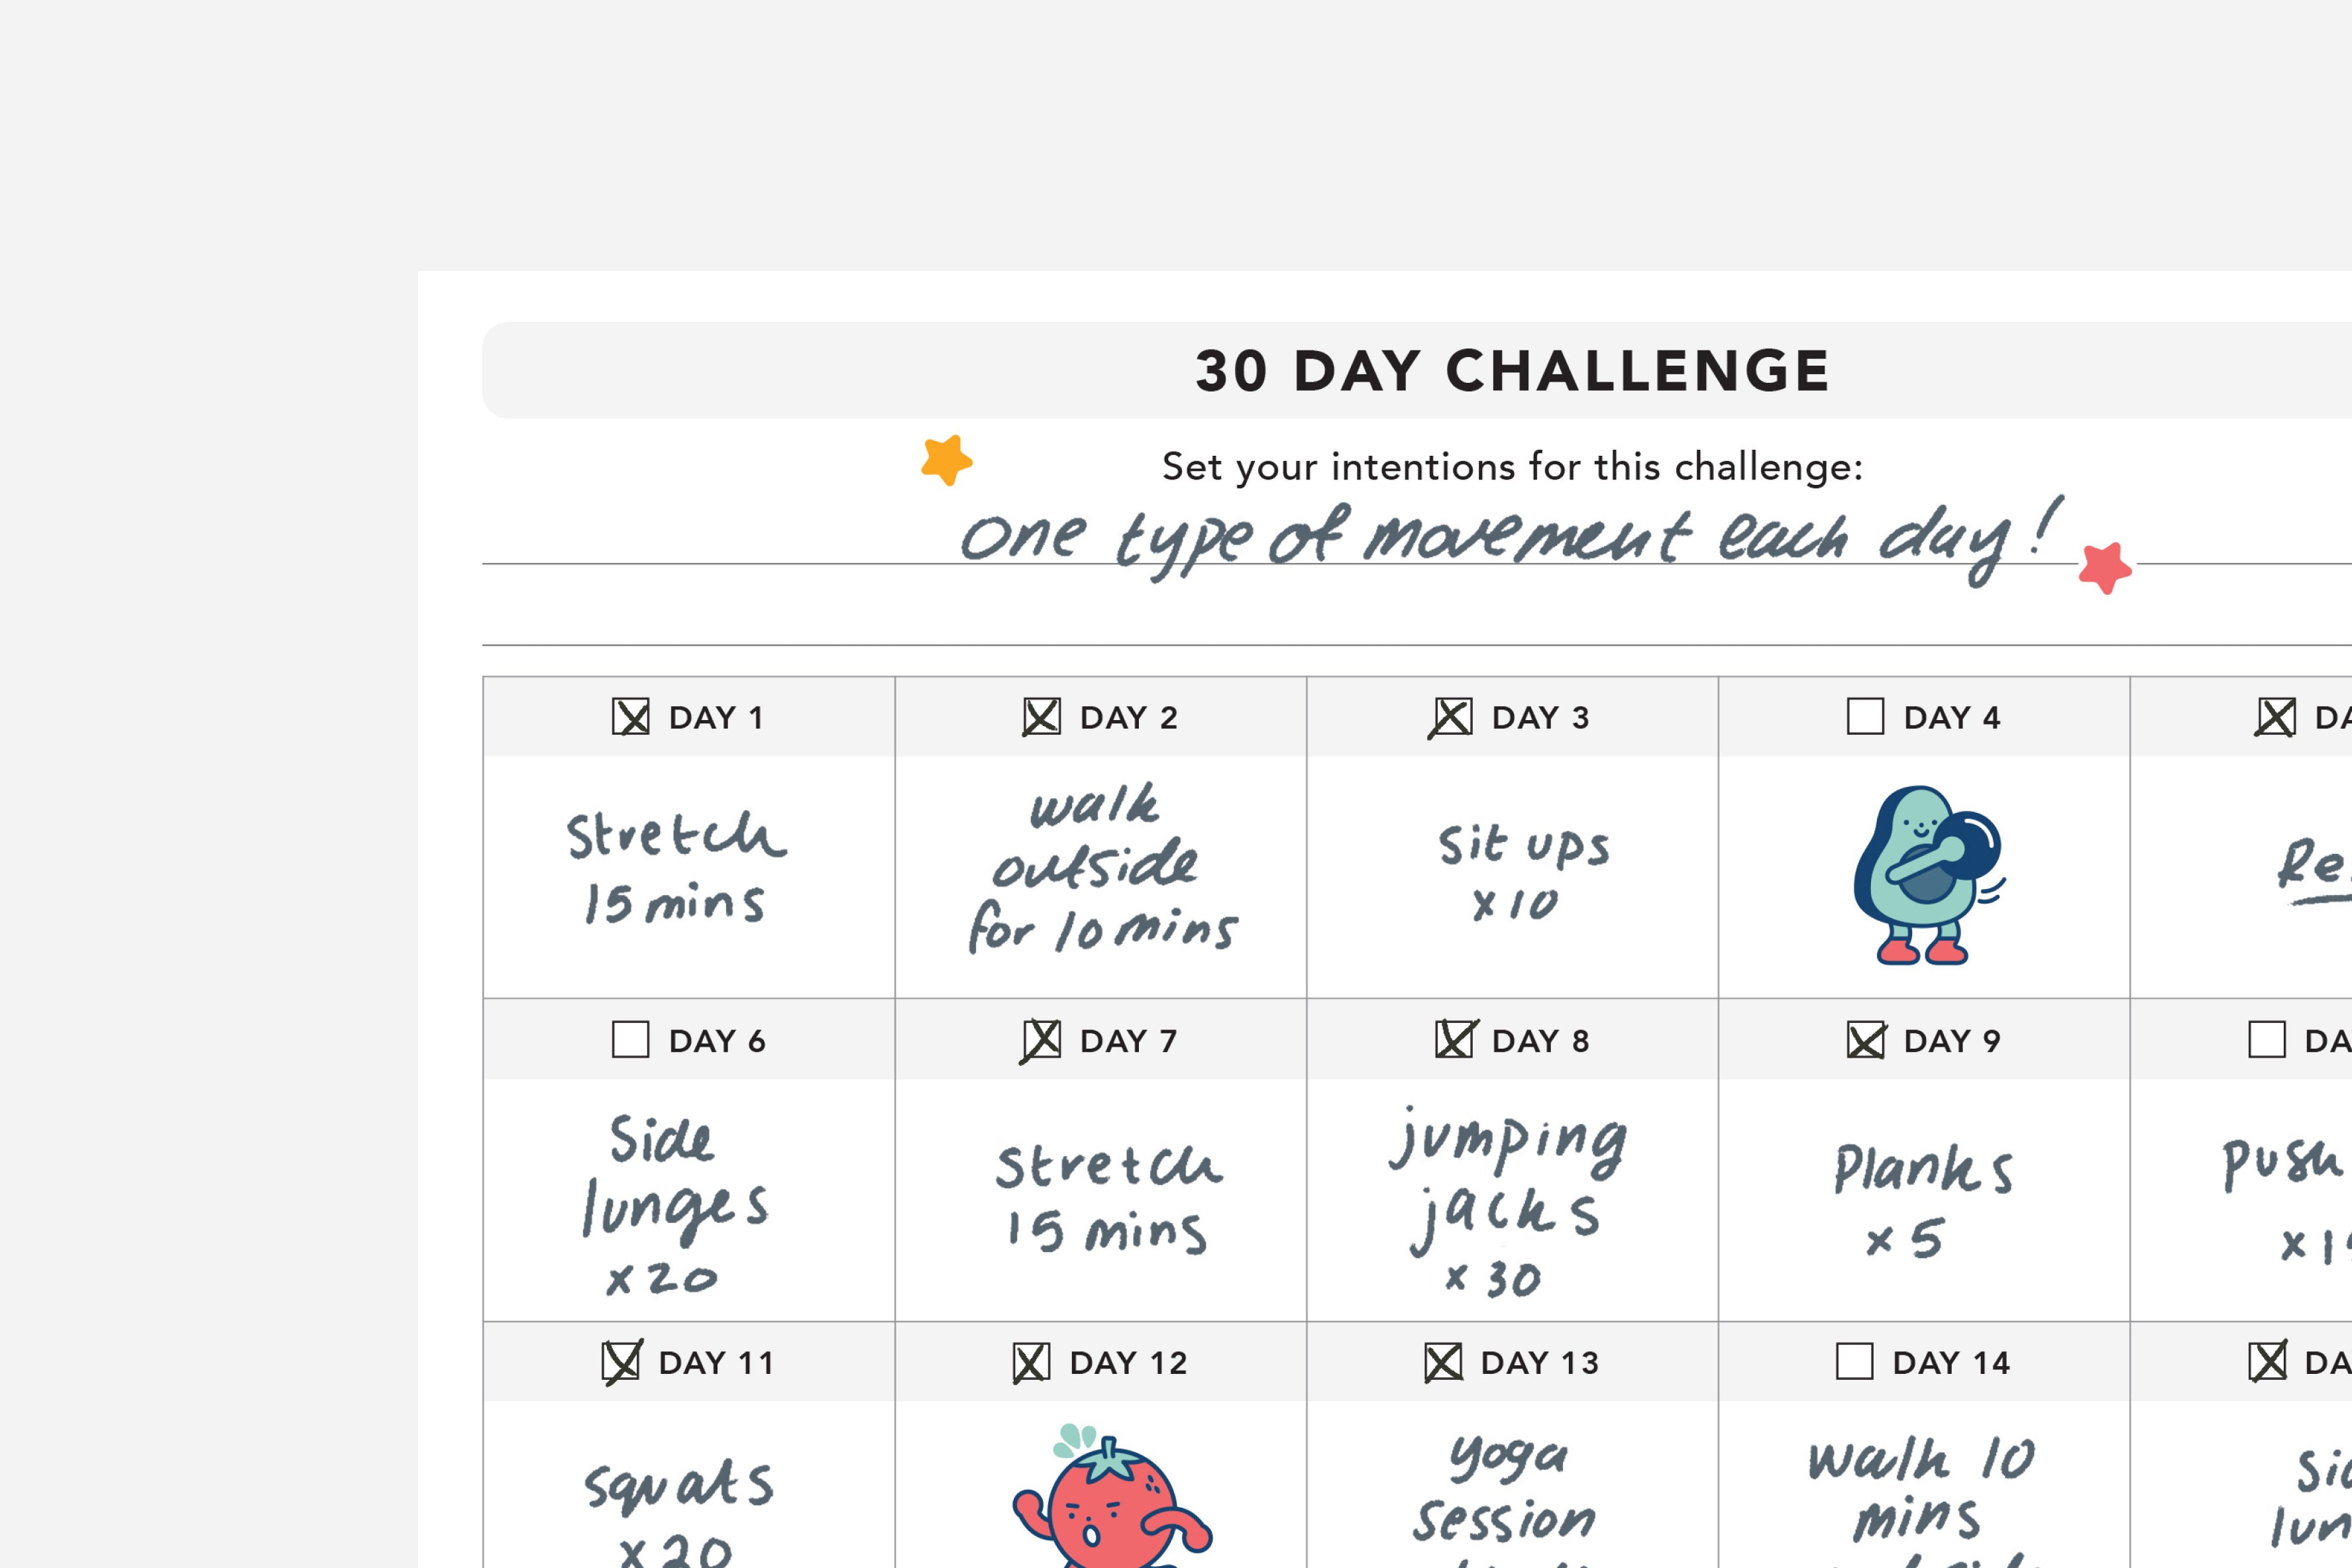 Create Your Own 30-Day Challenge